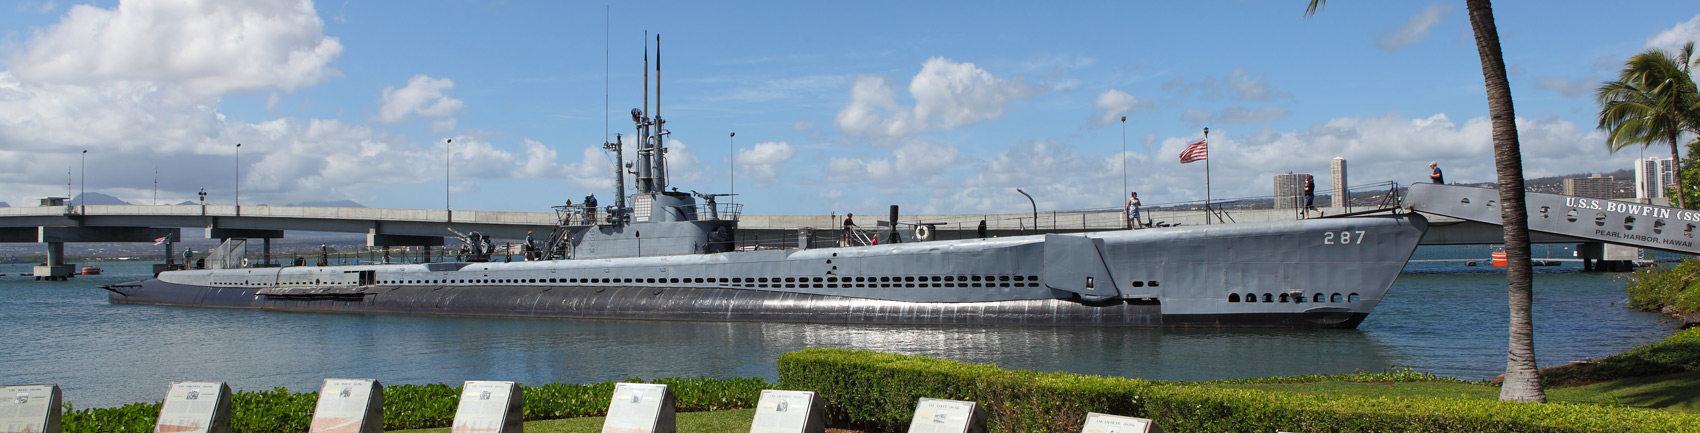 Touring Pearl Harbor